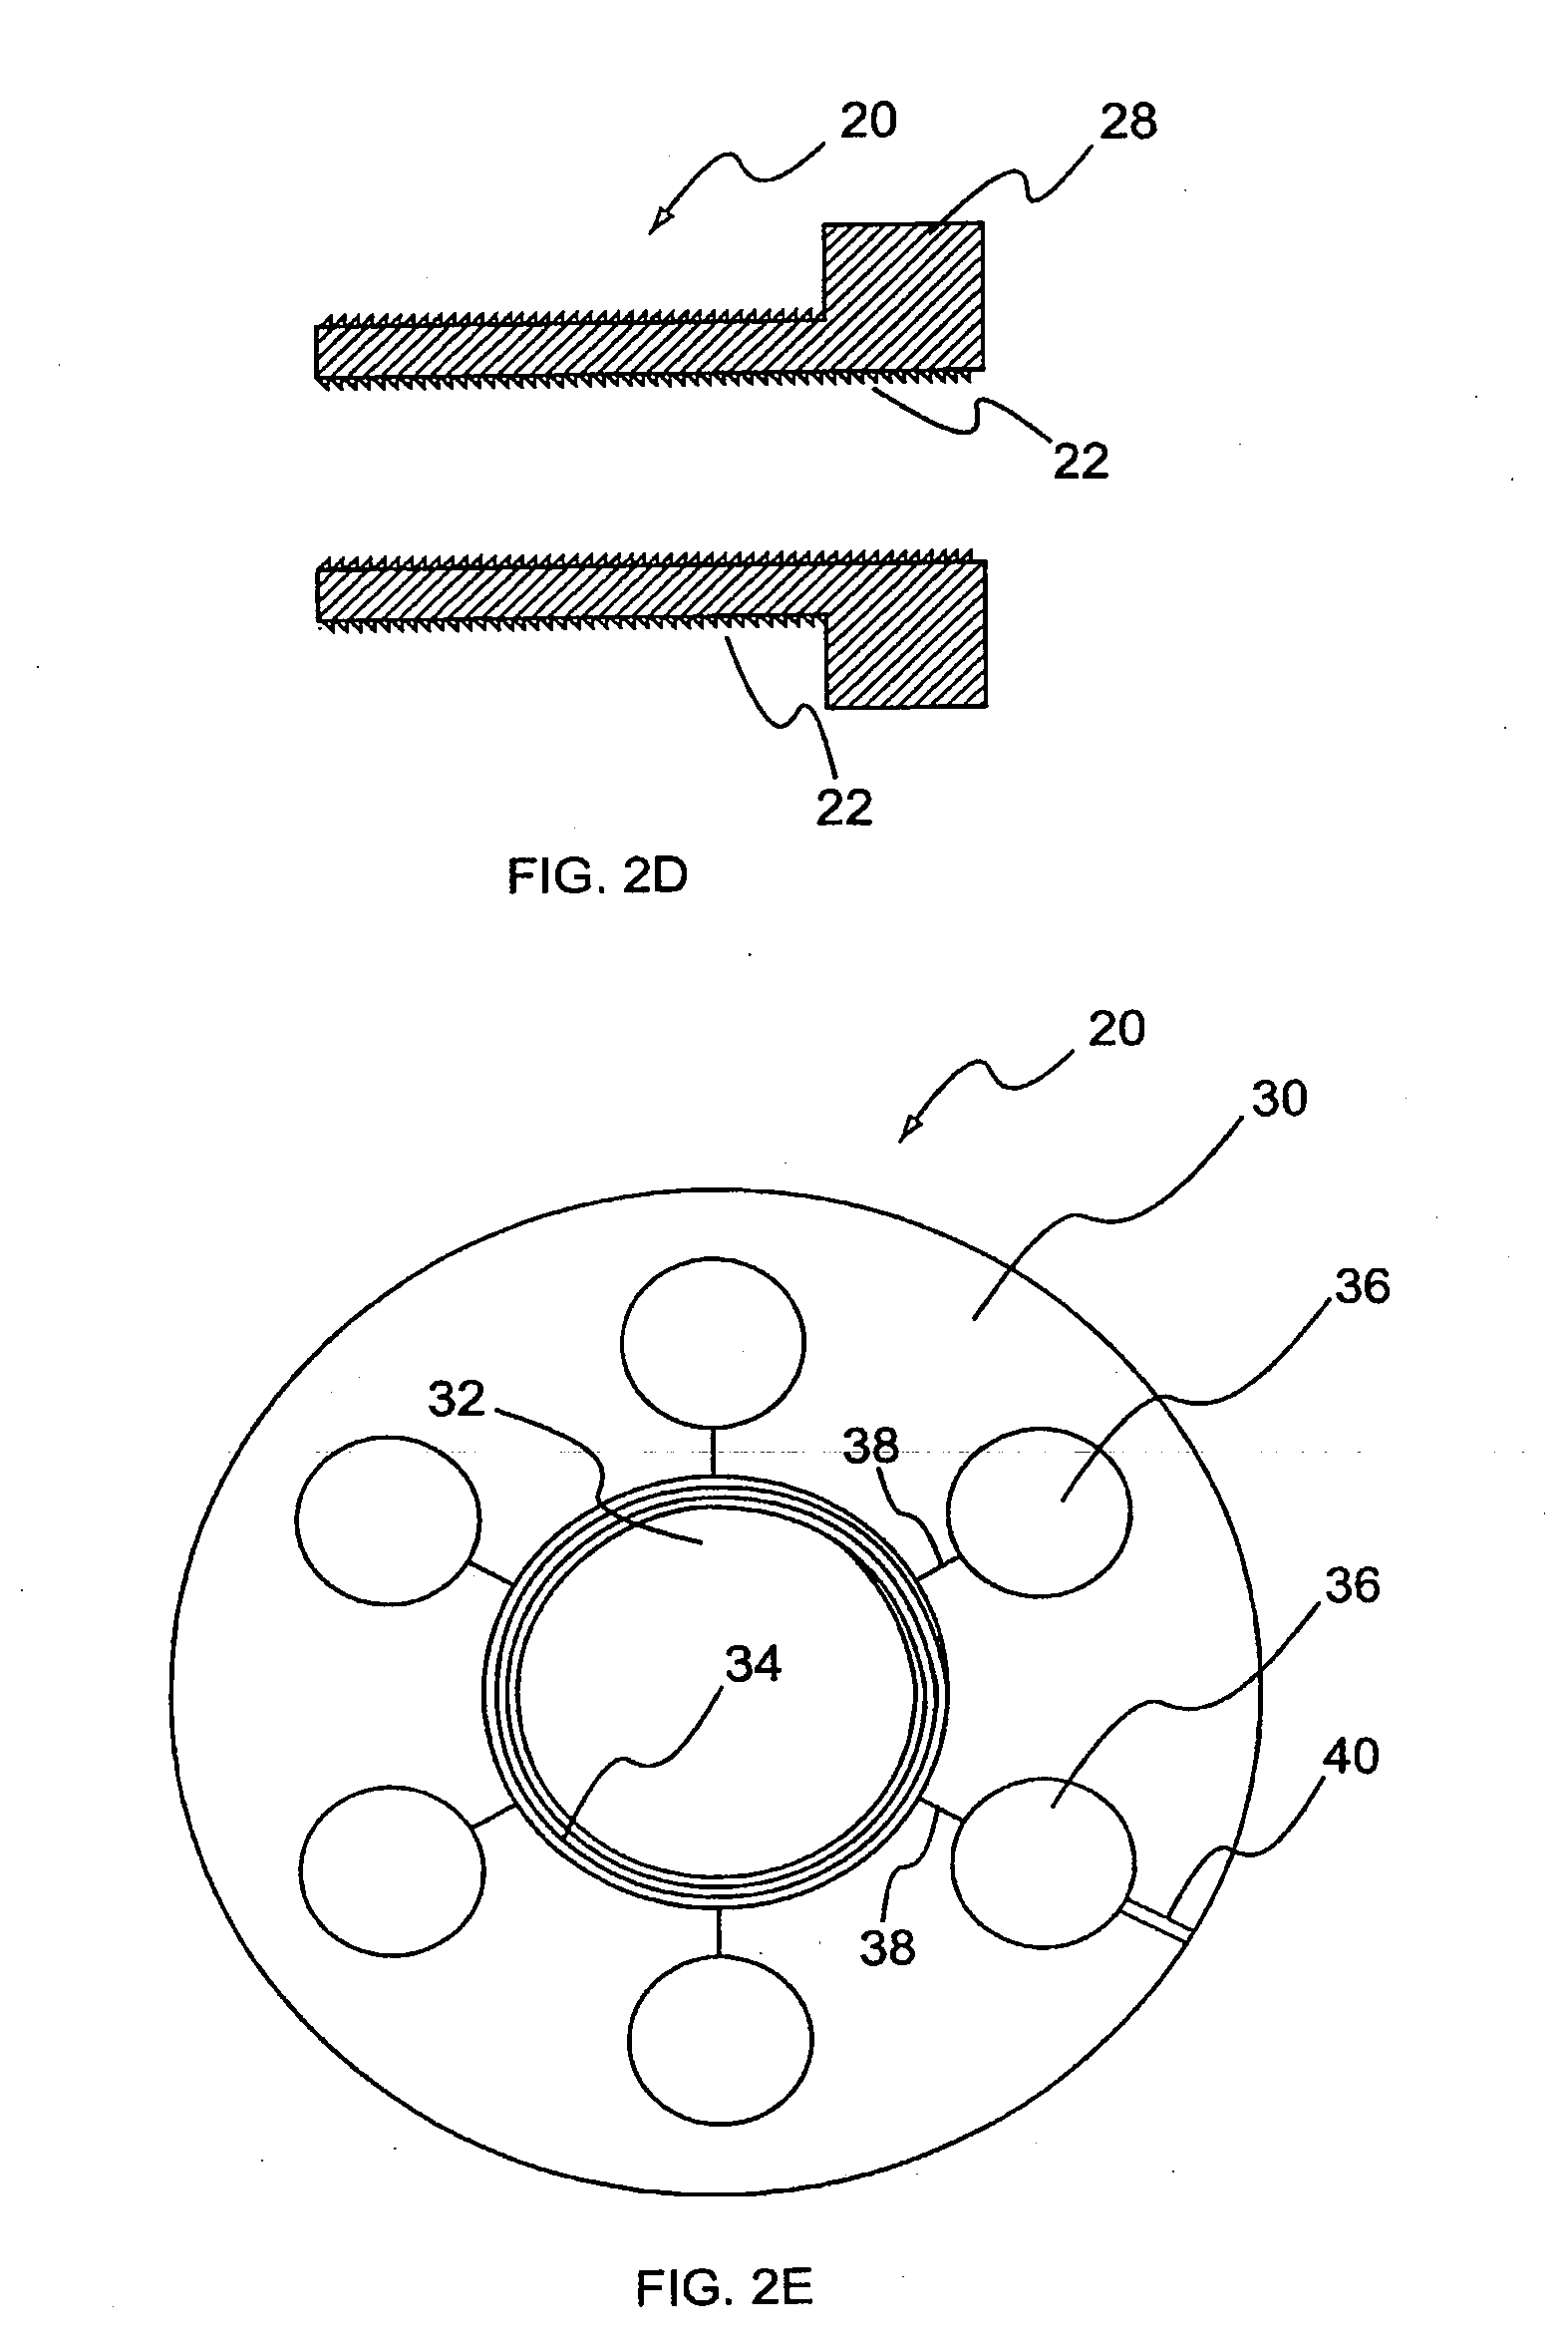 Cap device for use in the fixation of bone structures